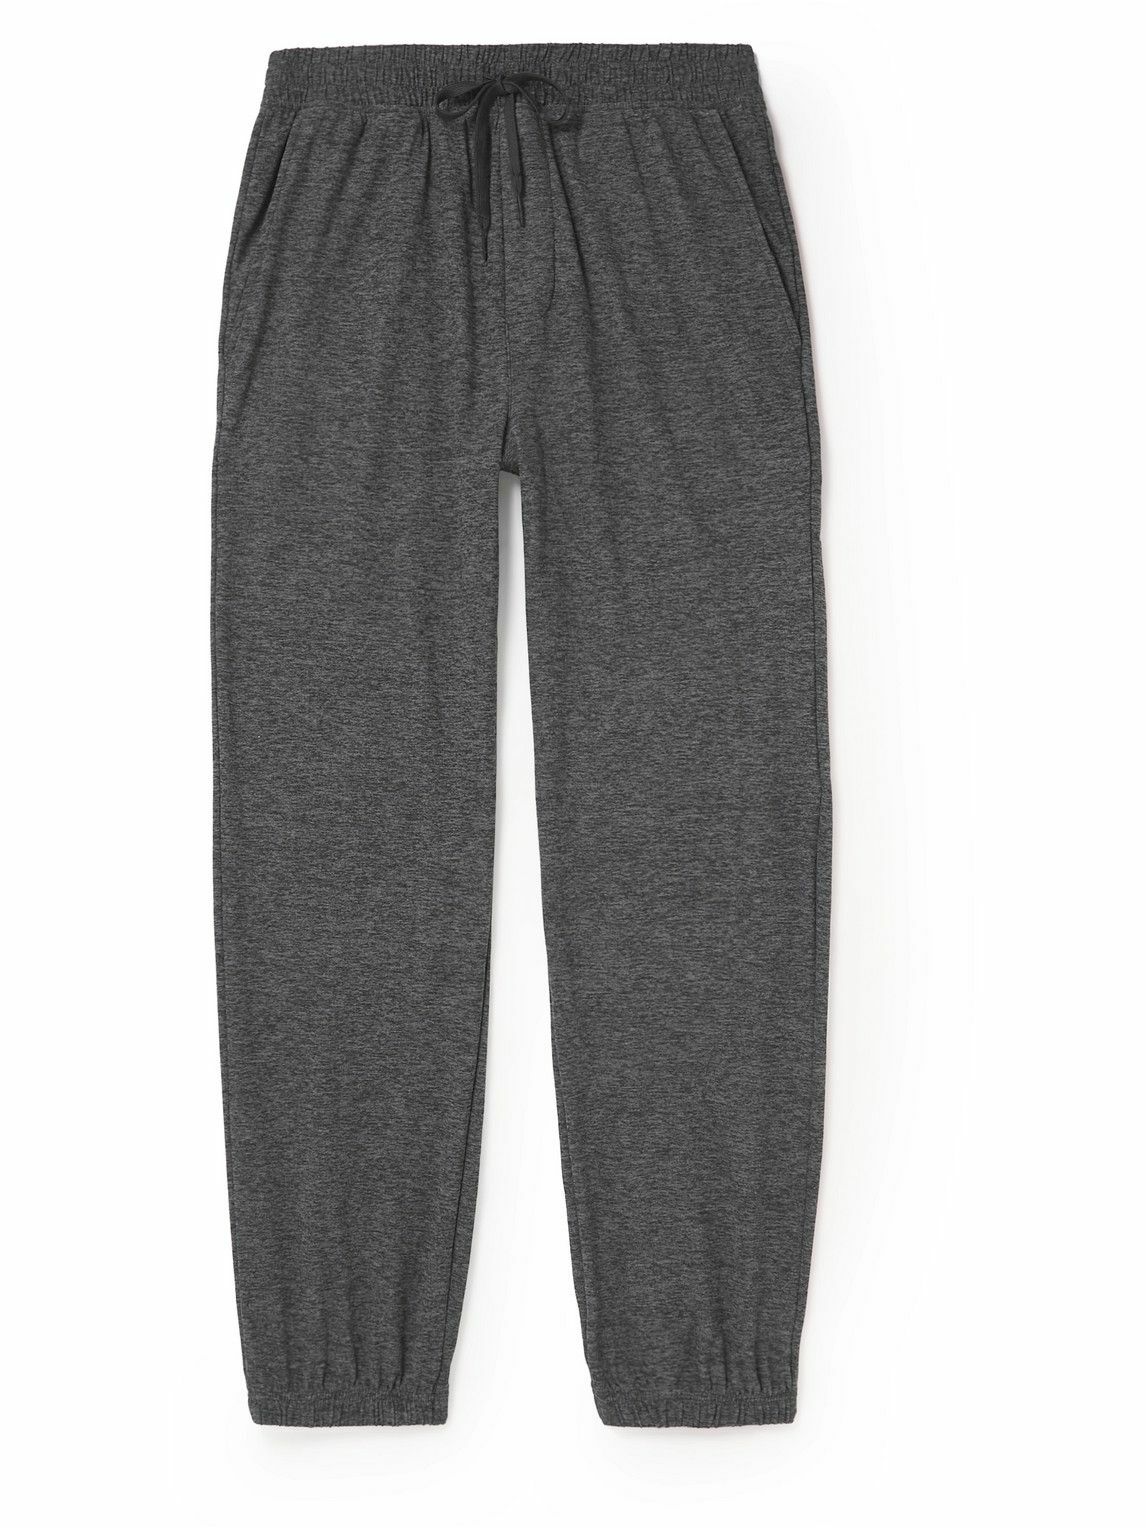 Outdoor Voices - Tapered CloudKnit Sweatpants - Gray Outdoor Voices